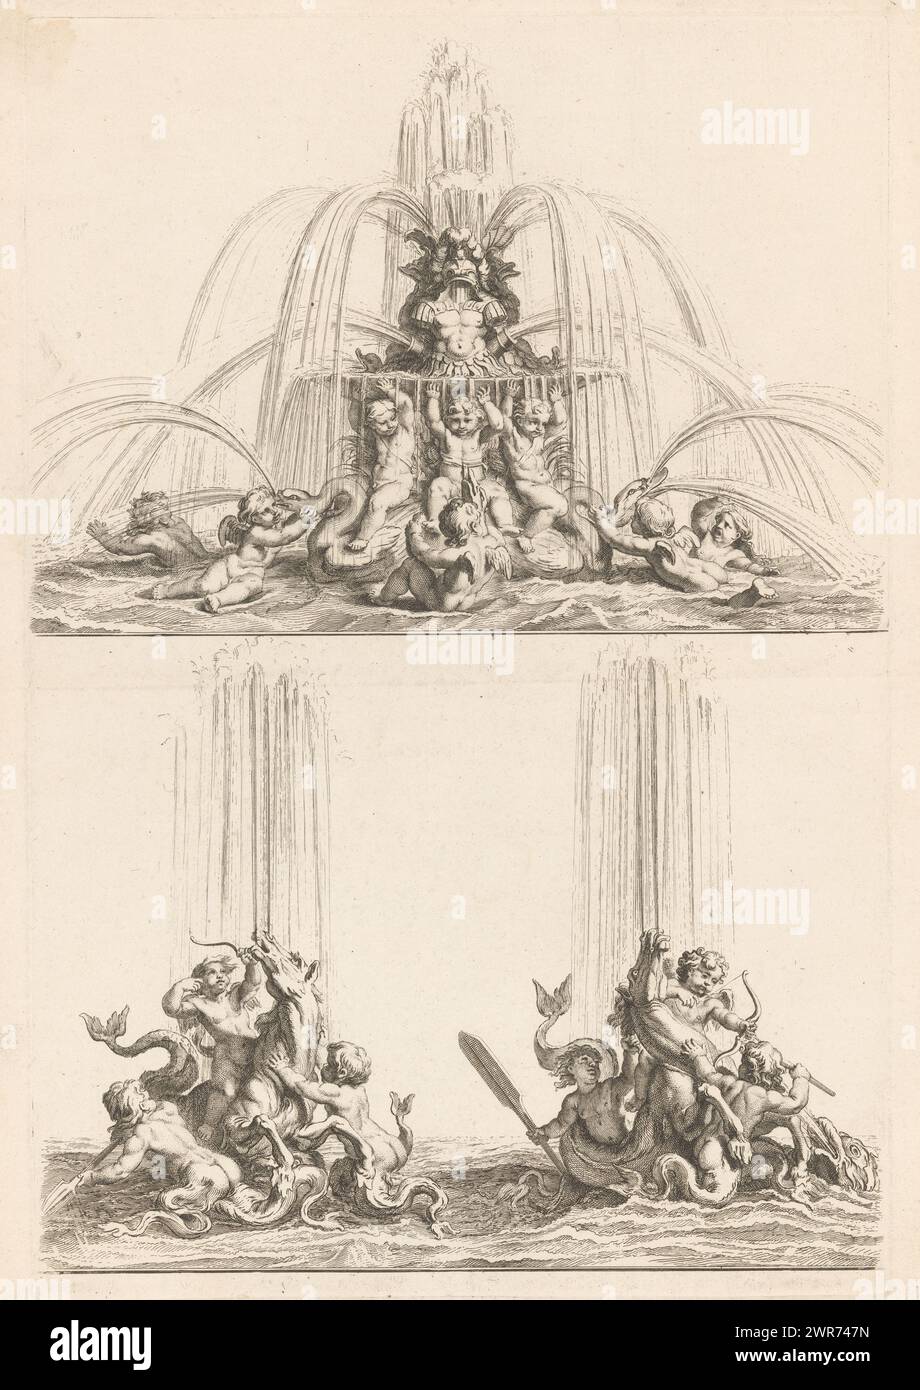 Three fountains with putti, Recueil De Divers Desseins de Fontaines Et De Frises Maritimes (series title), Three fountains. Above, putti sitting on swans wear a shell with armor. Bottom left and right fountains with putti with bow and arrow sitting on hippocampi surrounded by putti with fish tails., print maker: Louis de Châtillon, after design by: Charles Le Brun, Gerard Edelinck, Paris, 1672 - 1686, paper, etching, height 433 mm × width 288 mm, print Stock Photo